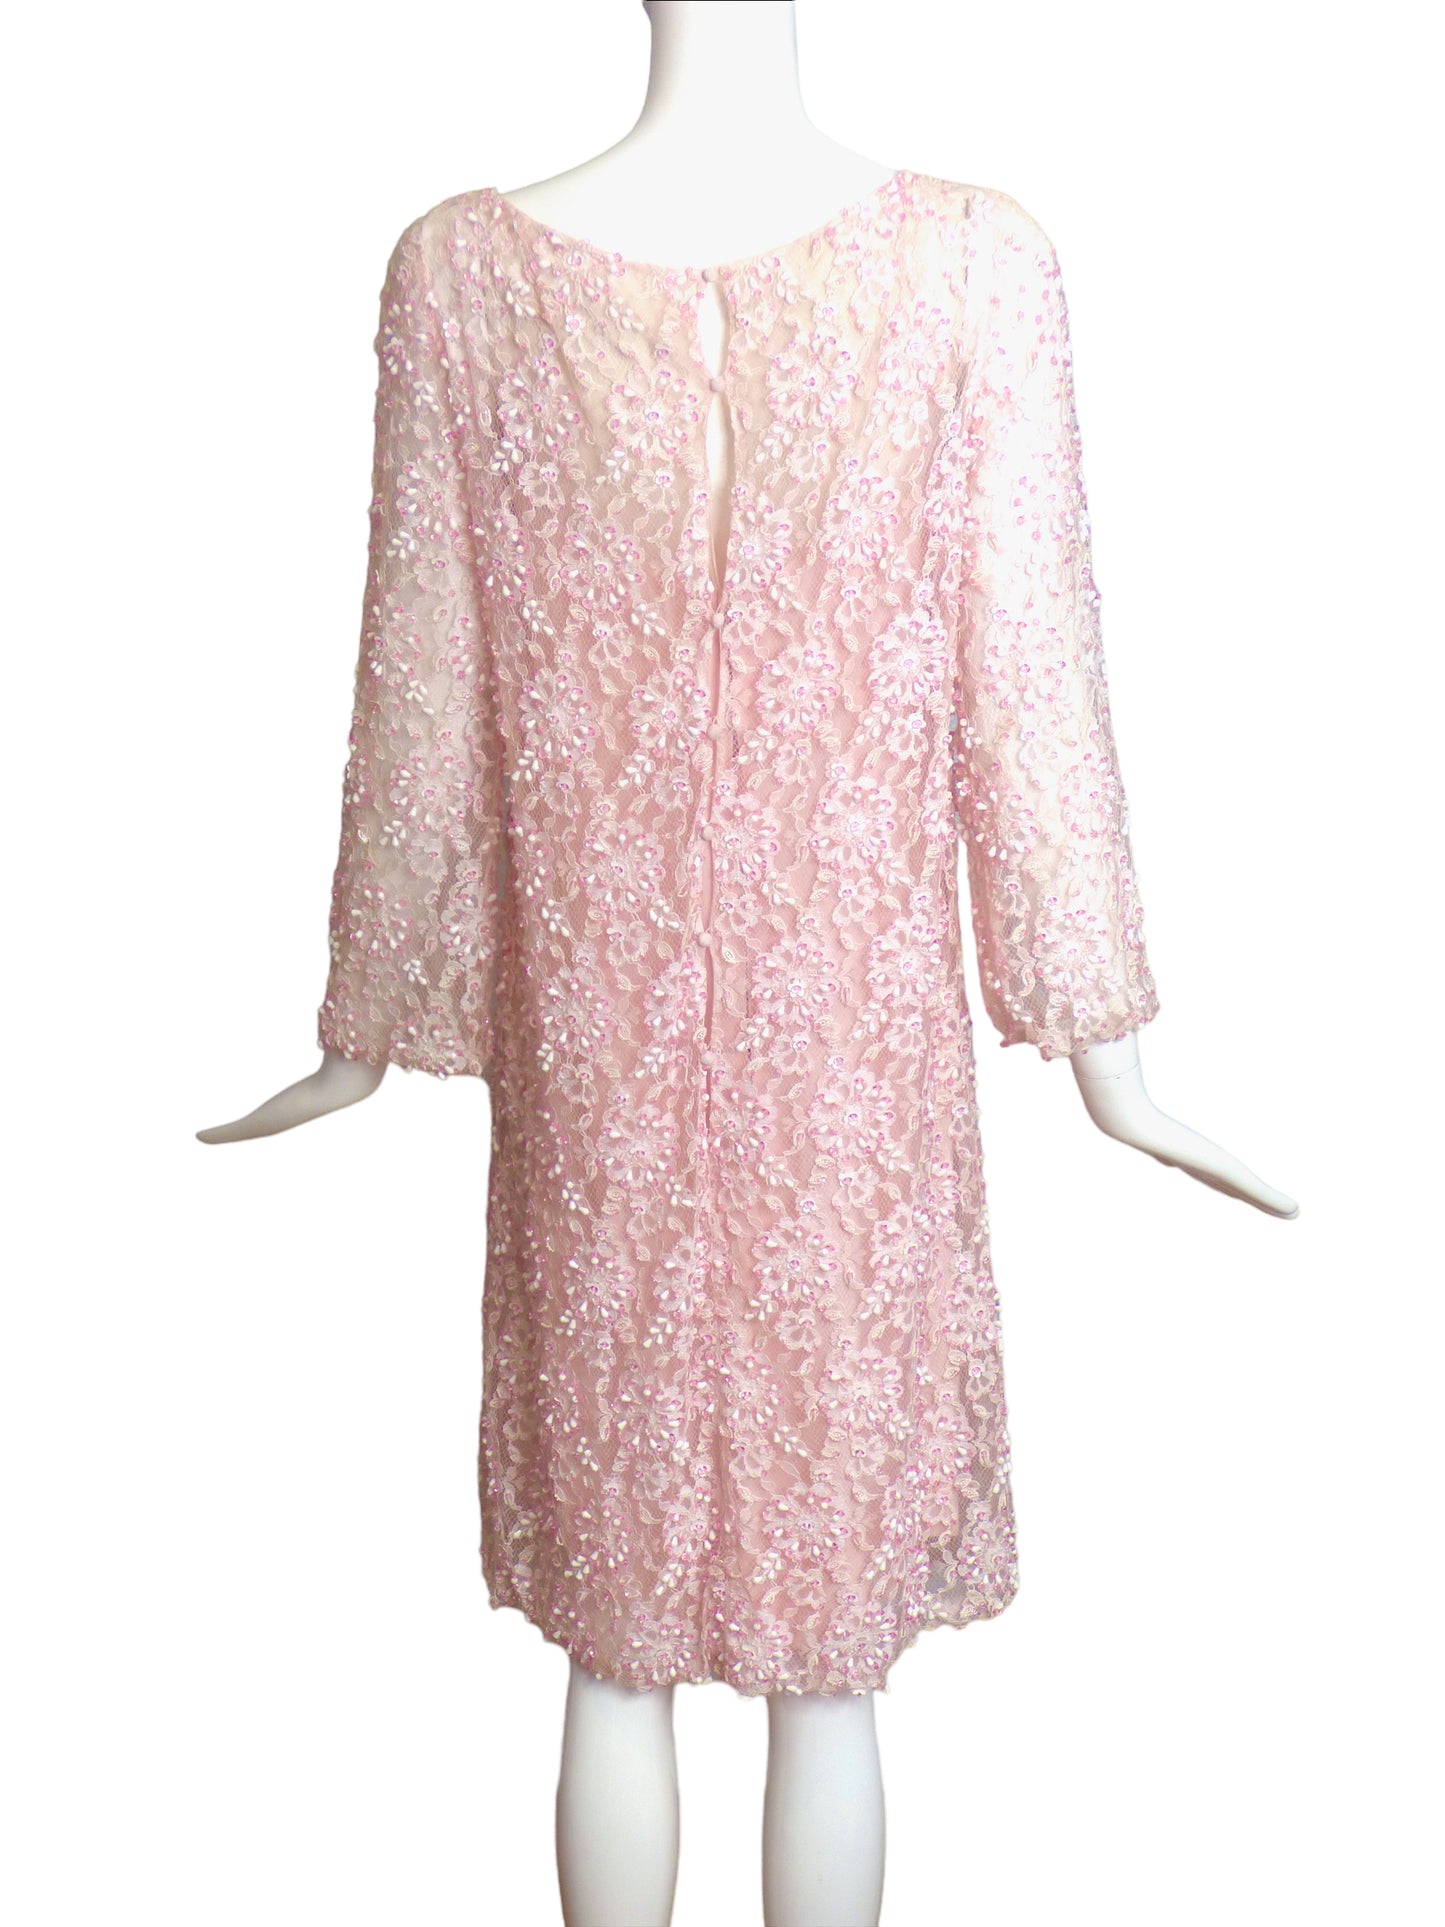 MALCOLM STARR- 1970s Pink Beaded Dress, Size 10